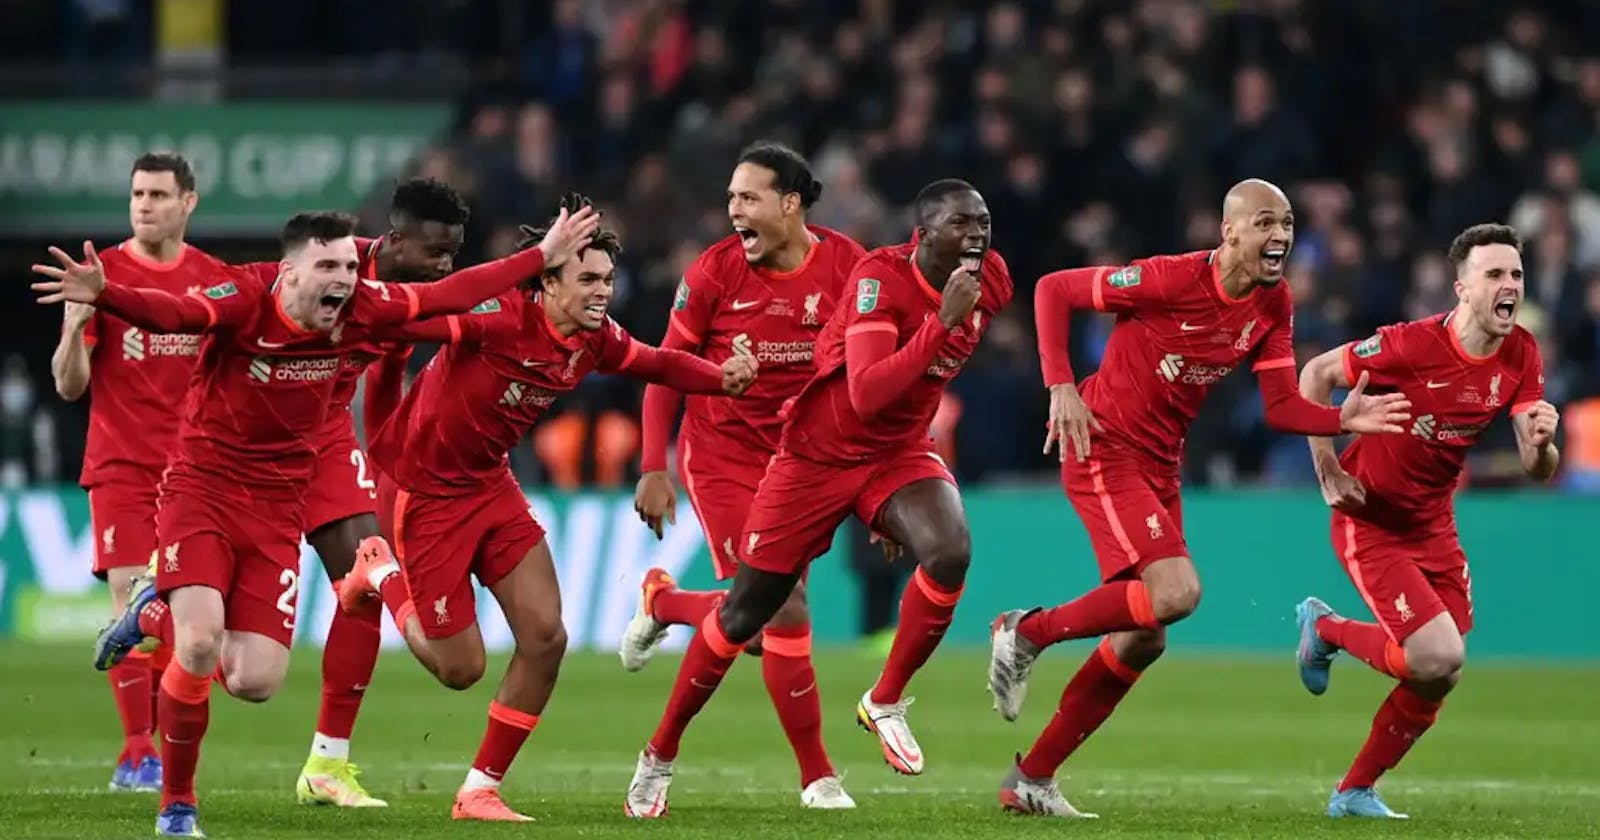 'We'll go for it' - Liverpool aim to complete first leg of quadruple